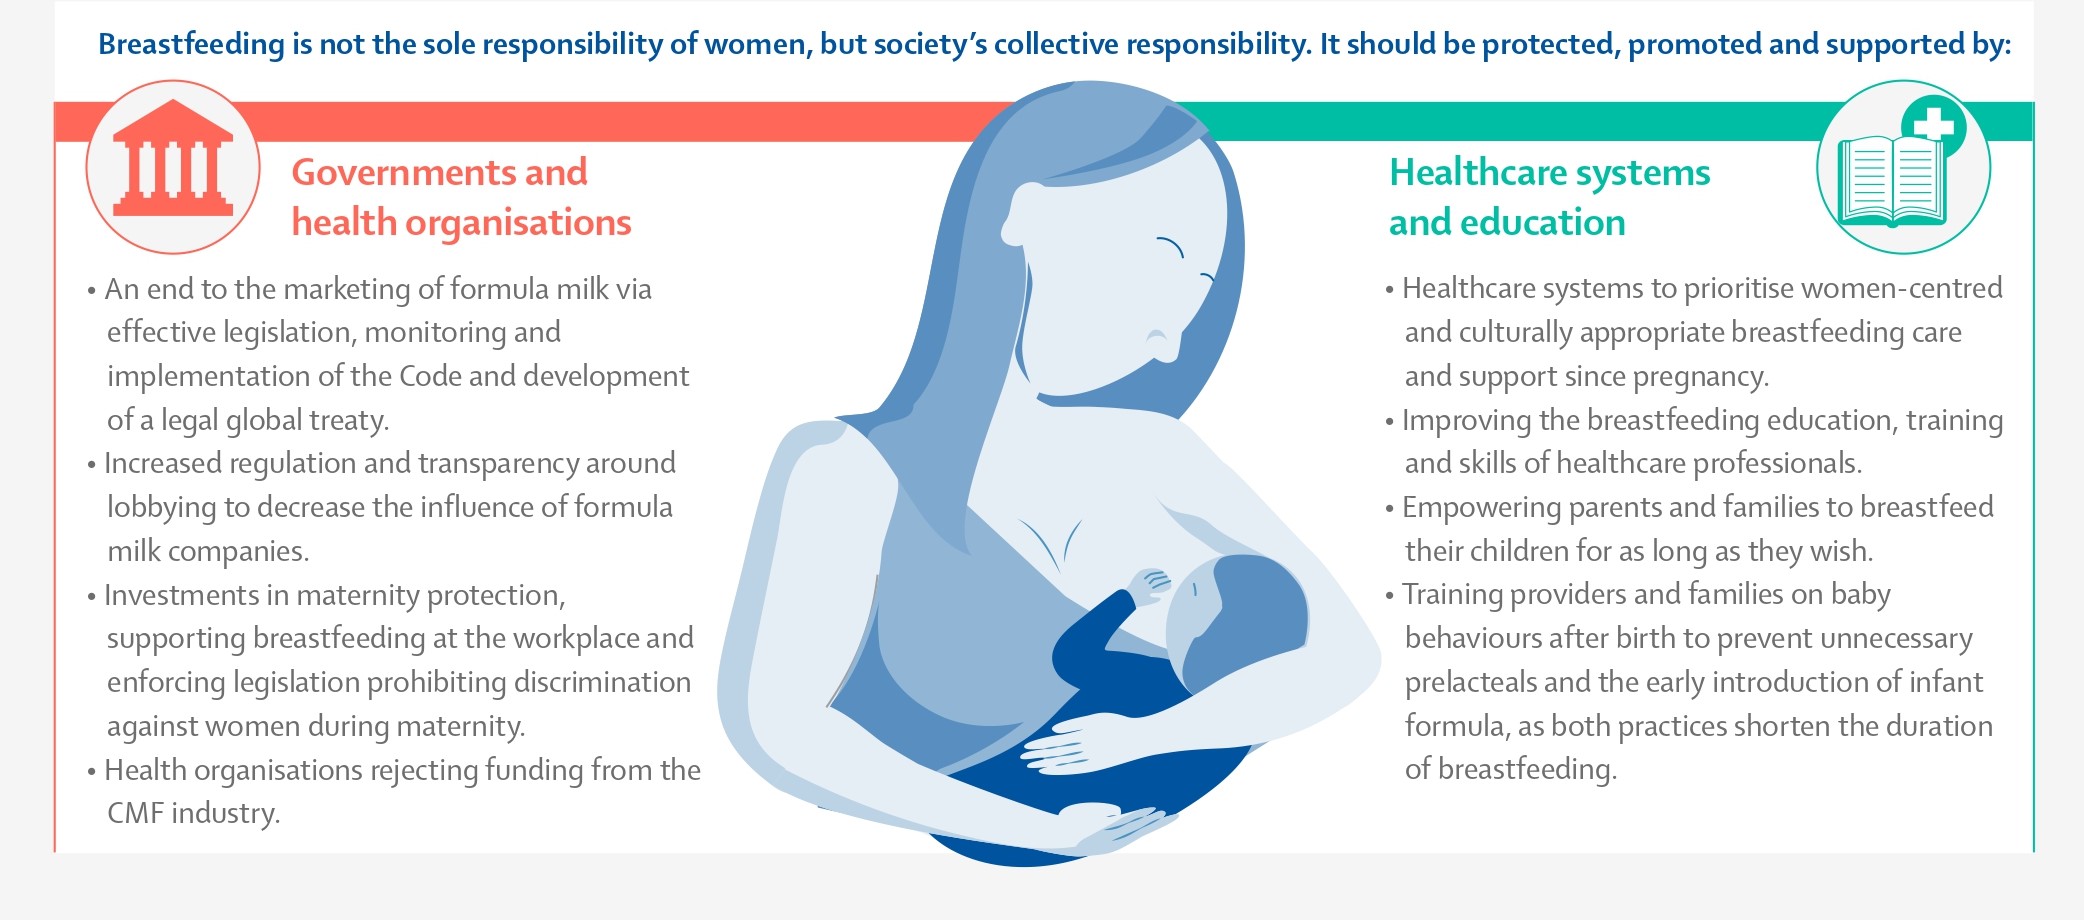 Alt text: link to The 2023 Lancet Series on Breastfeeding: infographics - https://www.thelancet.com/infographics-do/2023-lancet-series-breastfeeding